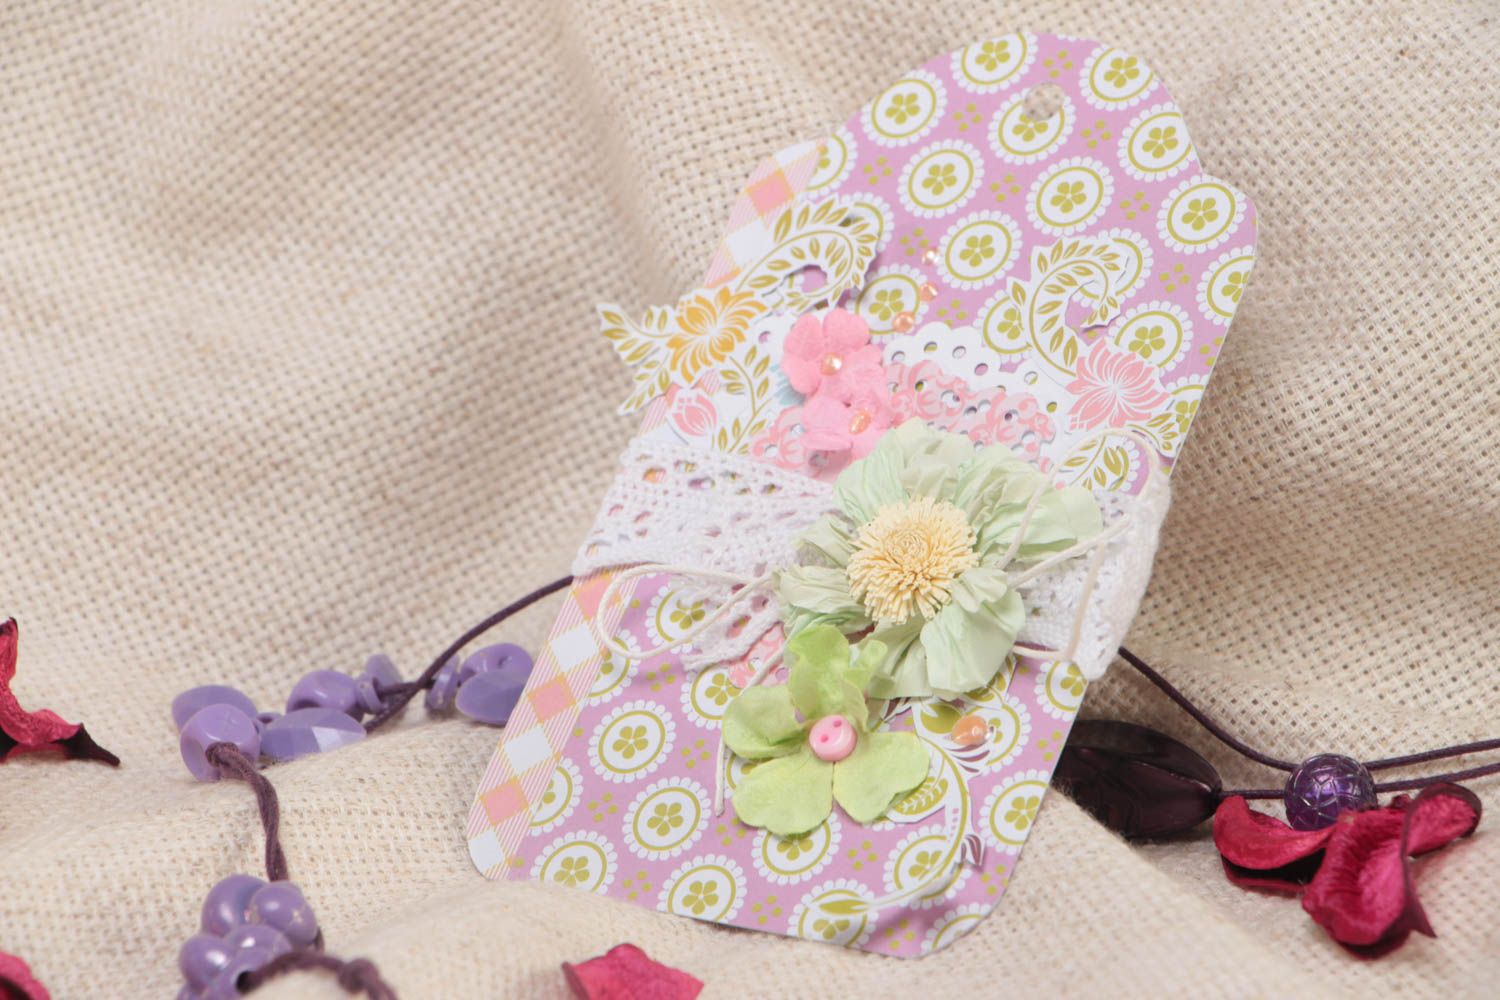 Handmade beautiful designer gift tag made using scrapbooking with flowers photo 1